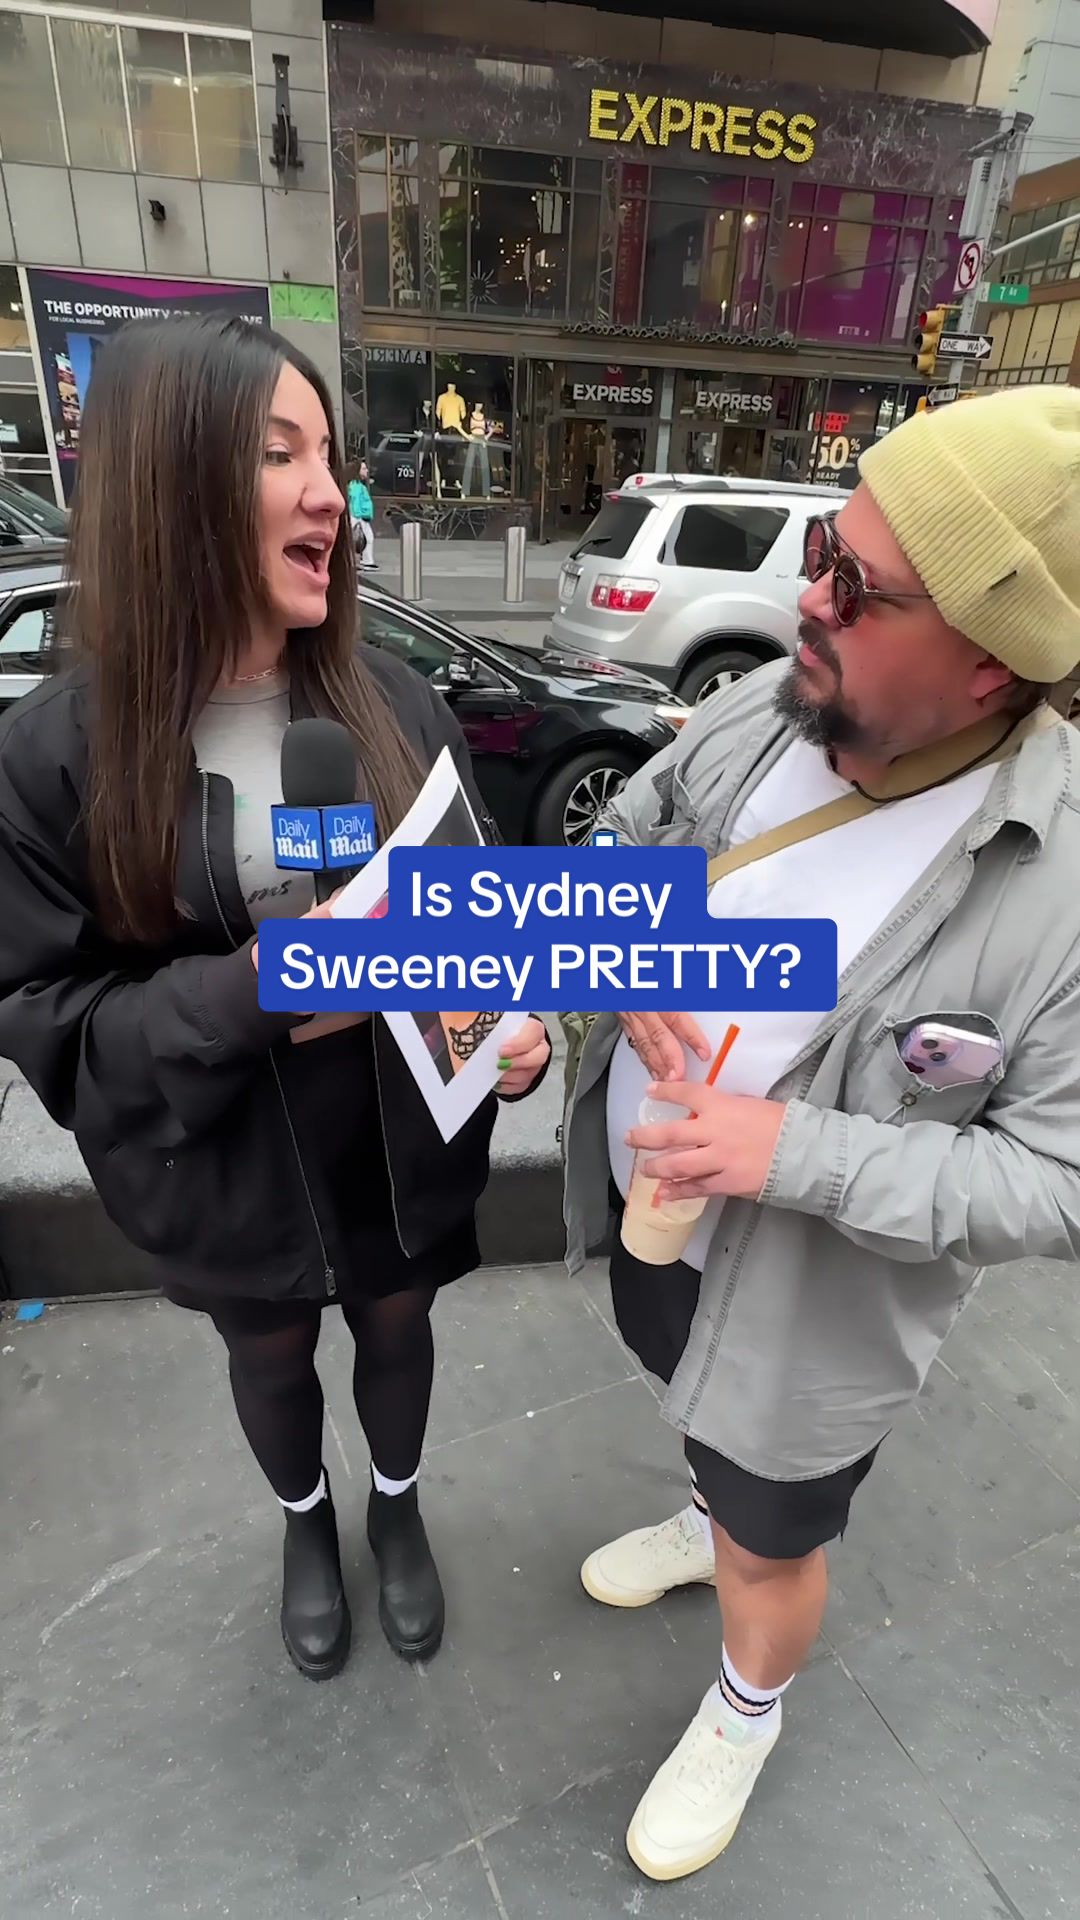 "She's probably just jealous" A Hollywood producer is going viral after saying Sydney Sweeney isn't pretty and can't act, what do you think? #sydneysweeneyedits #newyork #hollywoodstudios #zendaya #manonthestreet #fyp